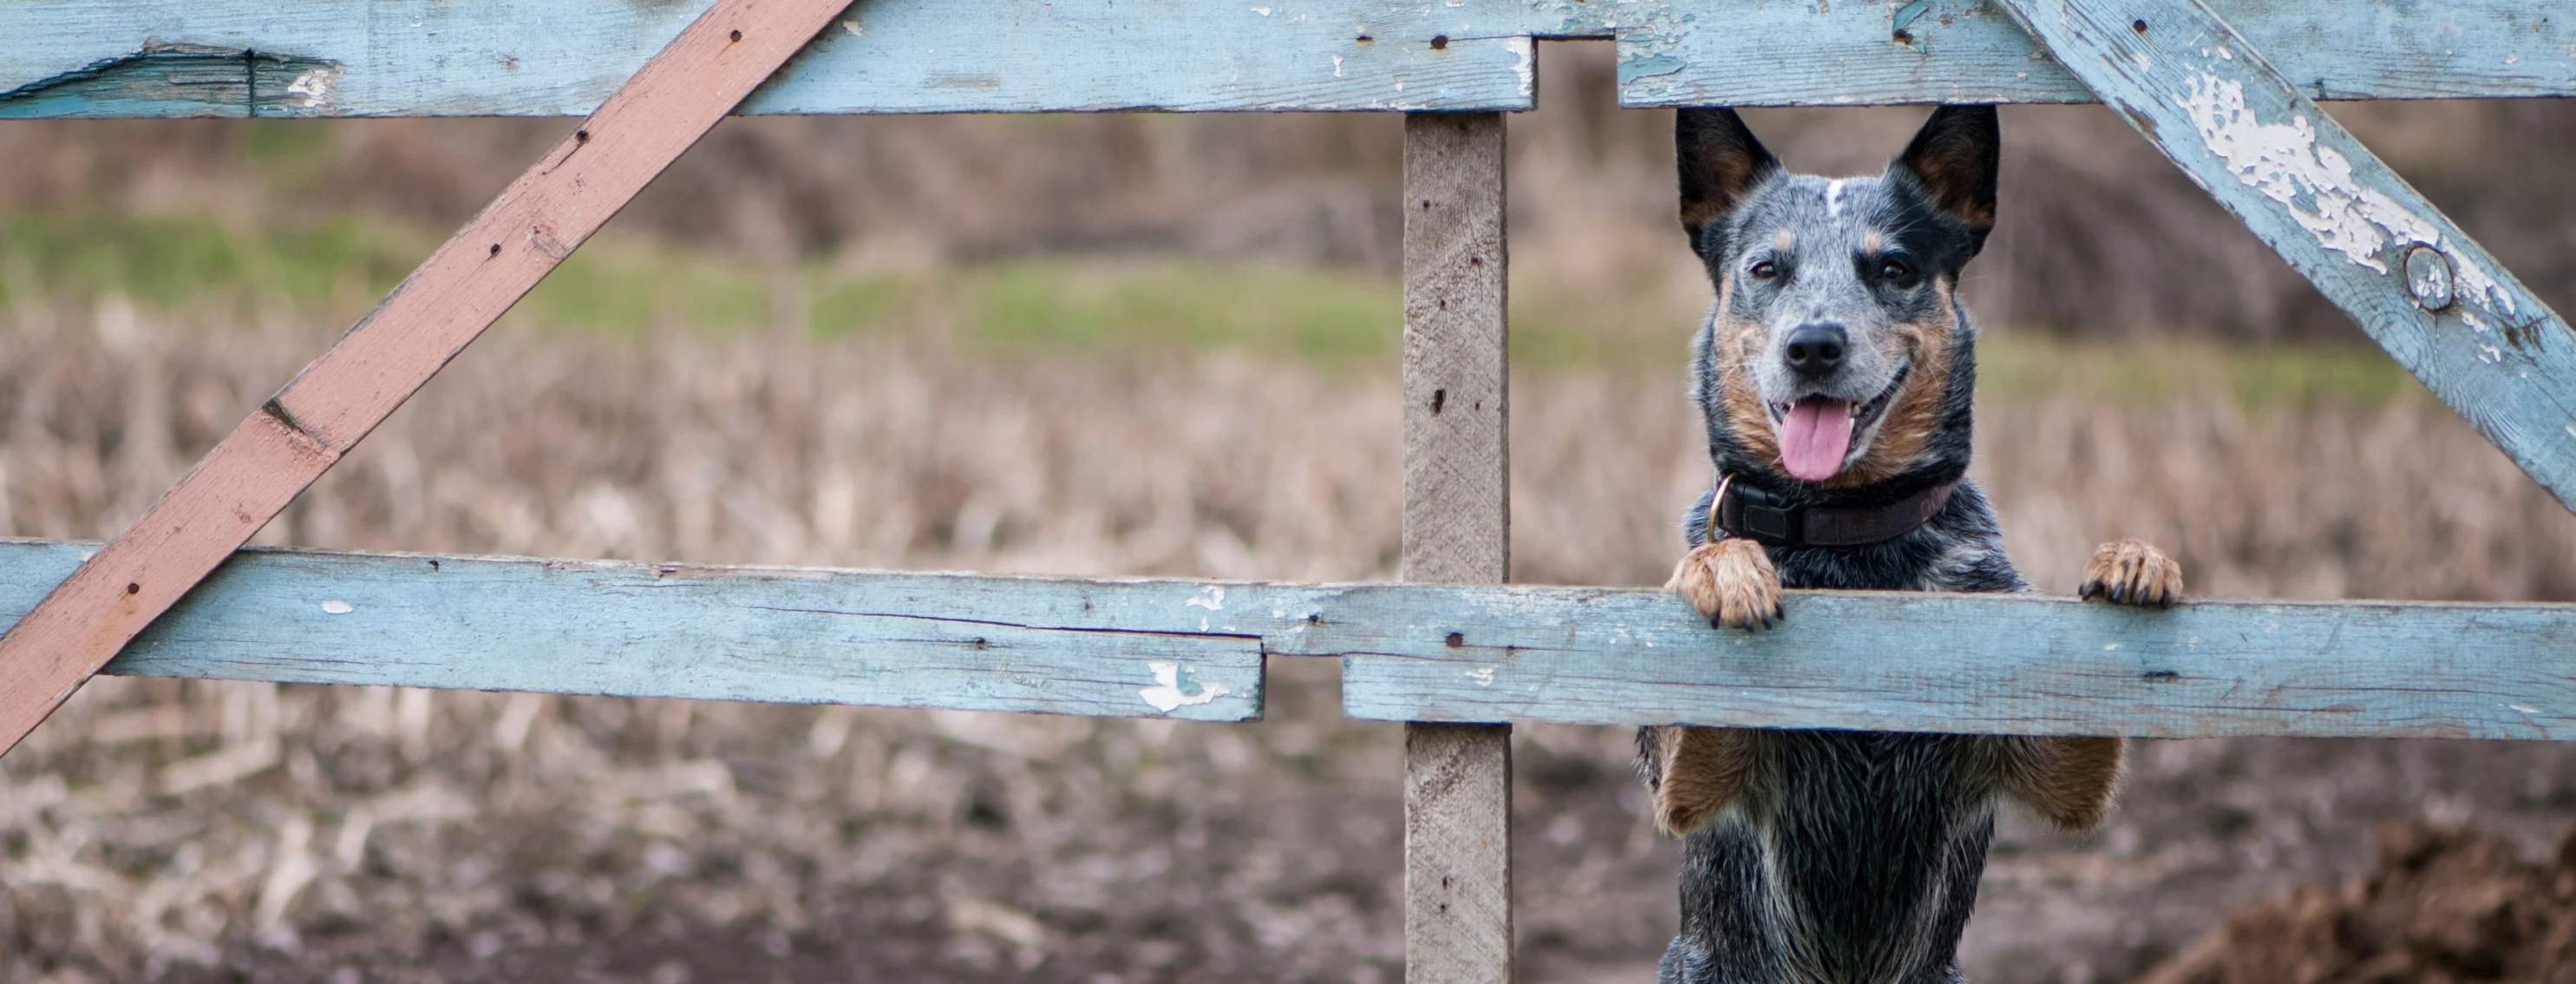 Dog standing and looking through a wooden fence